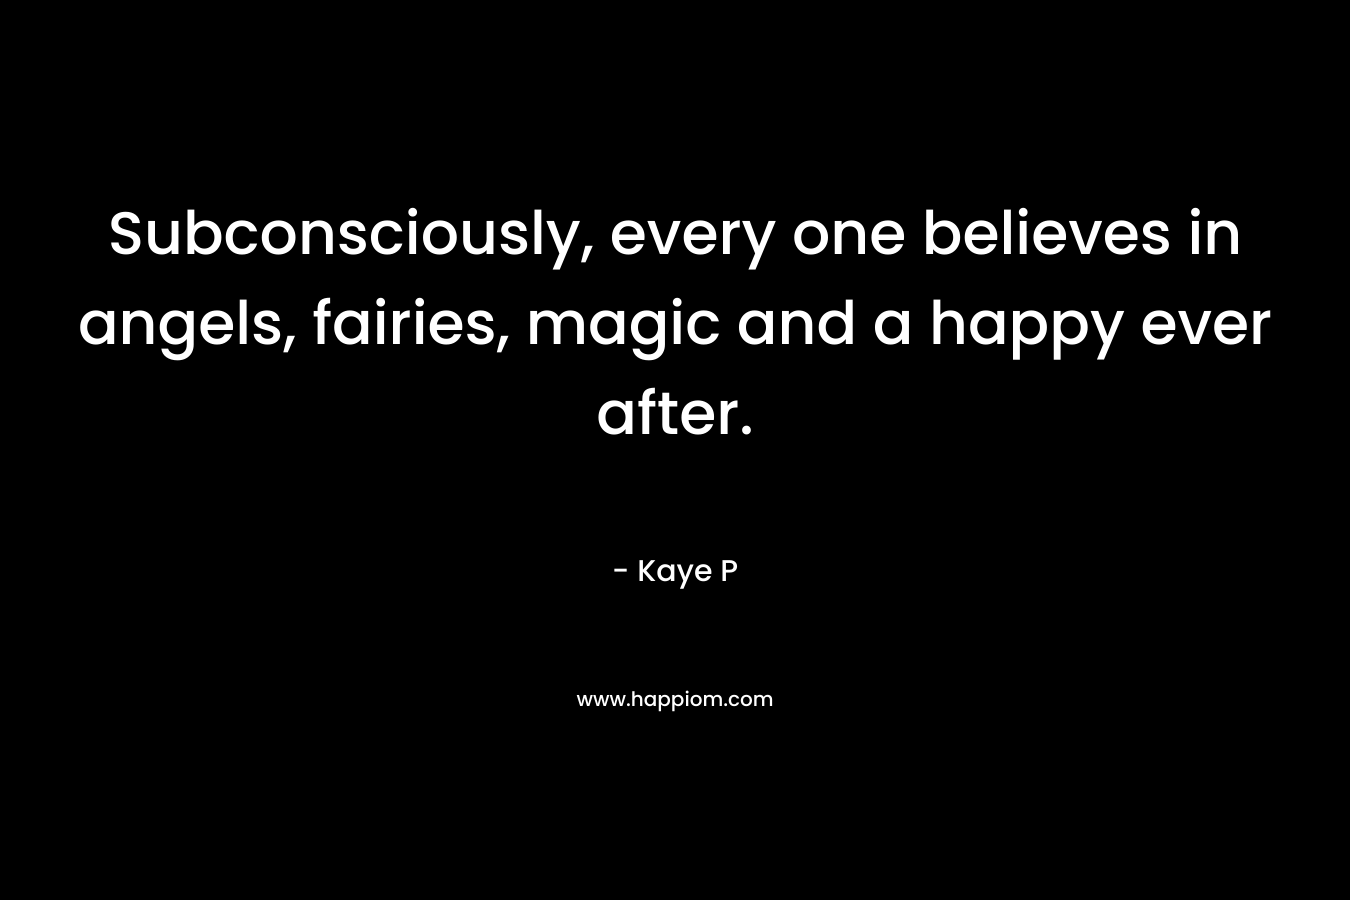 Subconsciously, every one believes in angels, fairies, magic and a happy ever after. – Kaye P